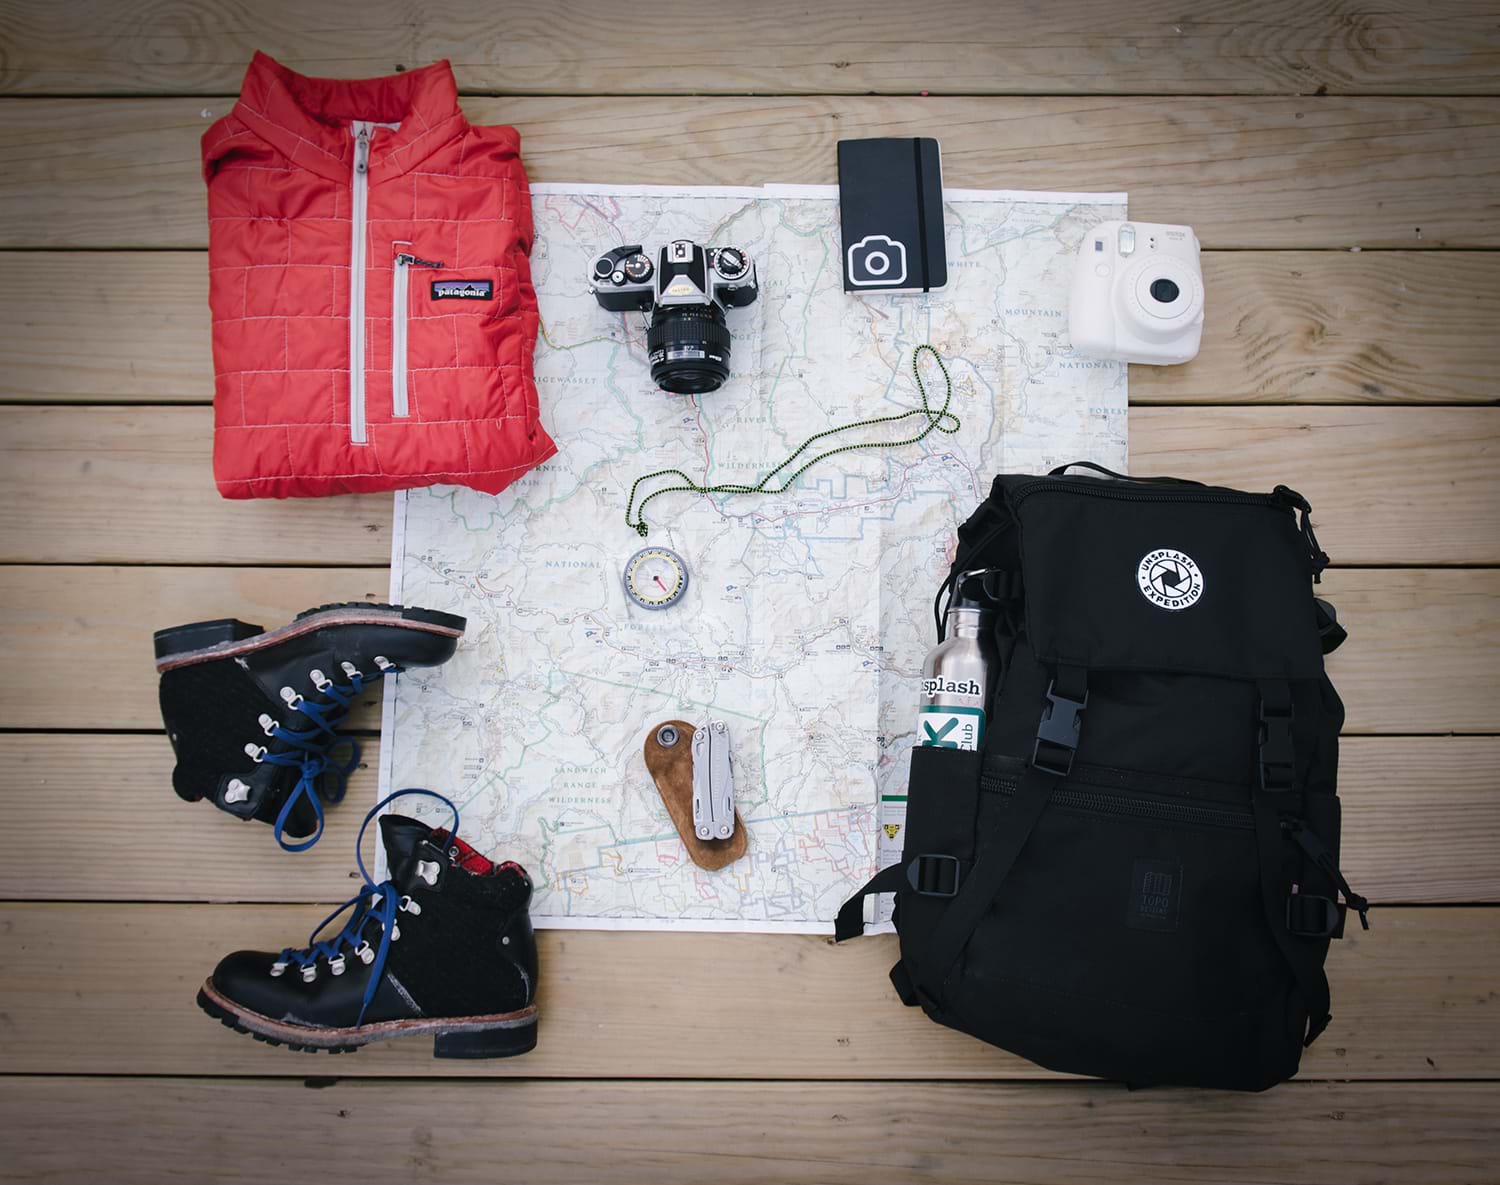 Map of national park, backpack, and other hiking essentials